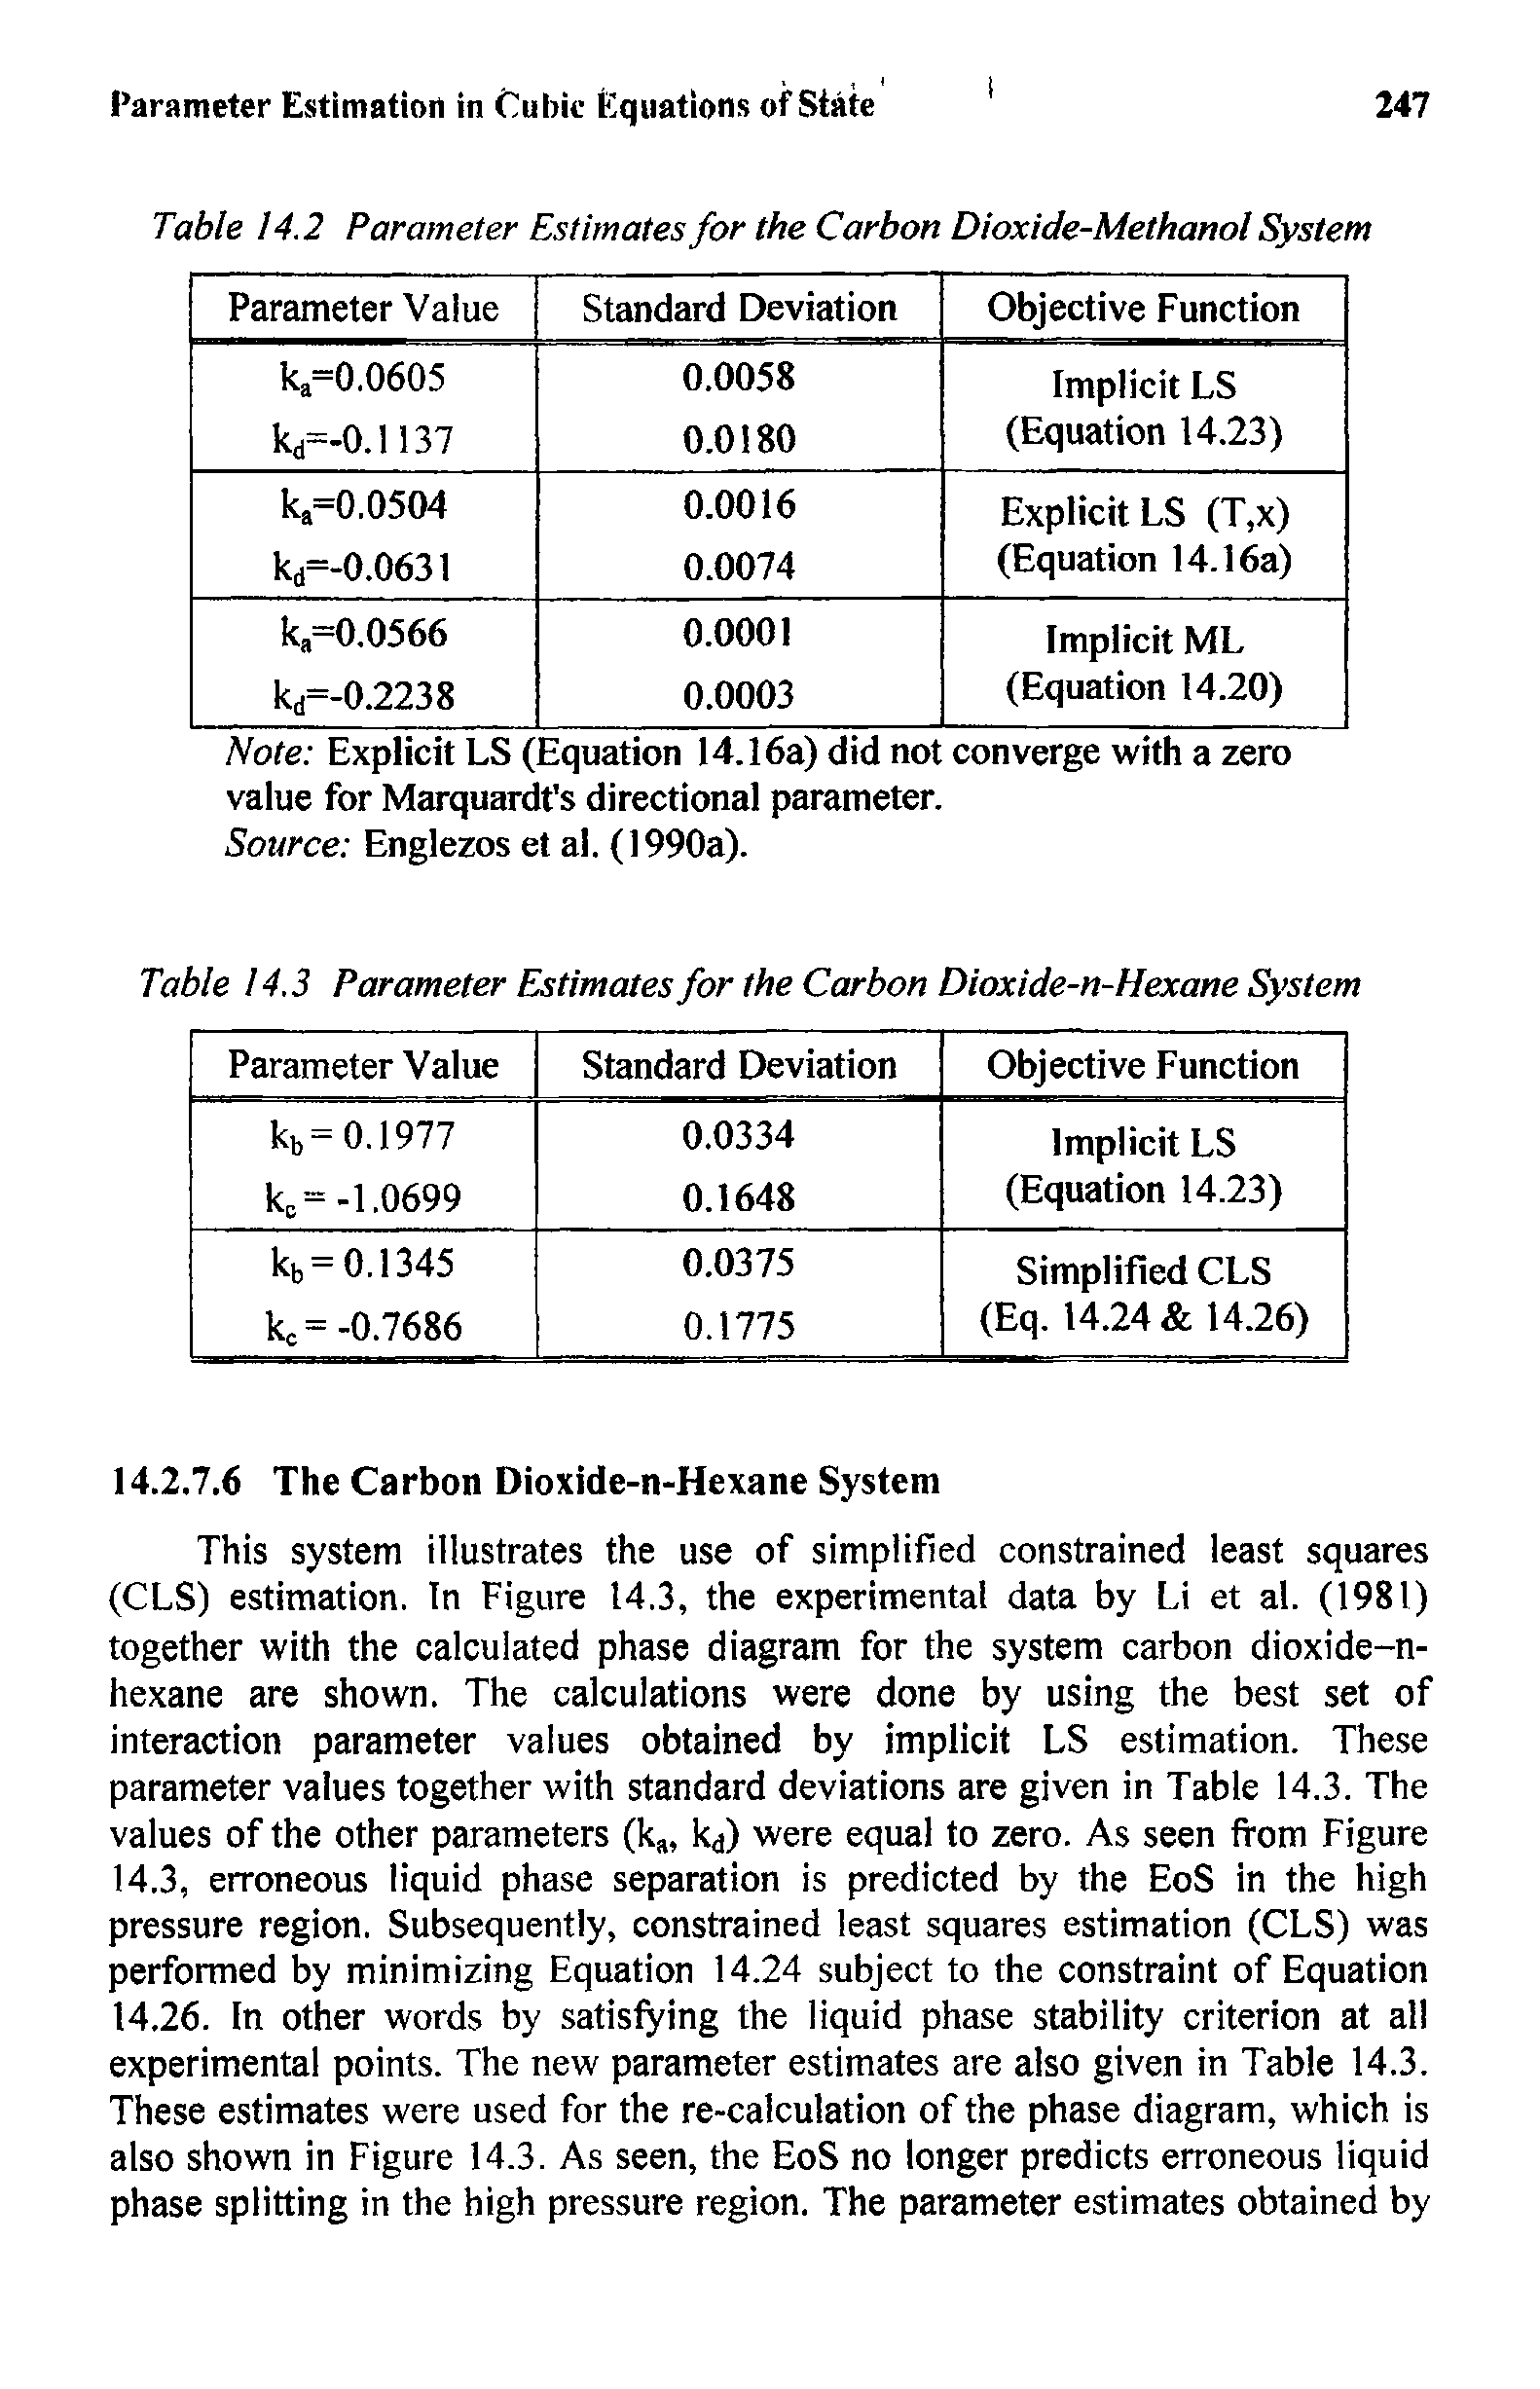 Table 14.3 Parameter Estimates for the Carbon Dioxide-n-Hexane System...